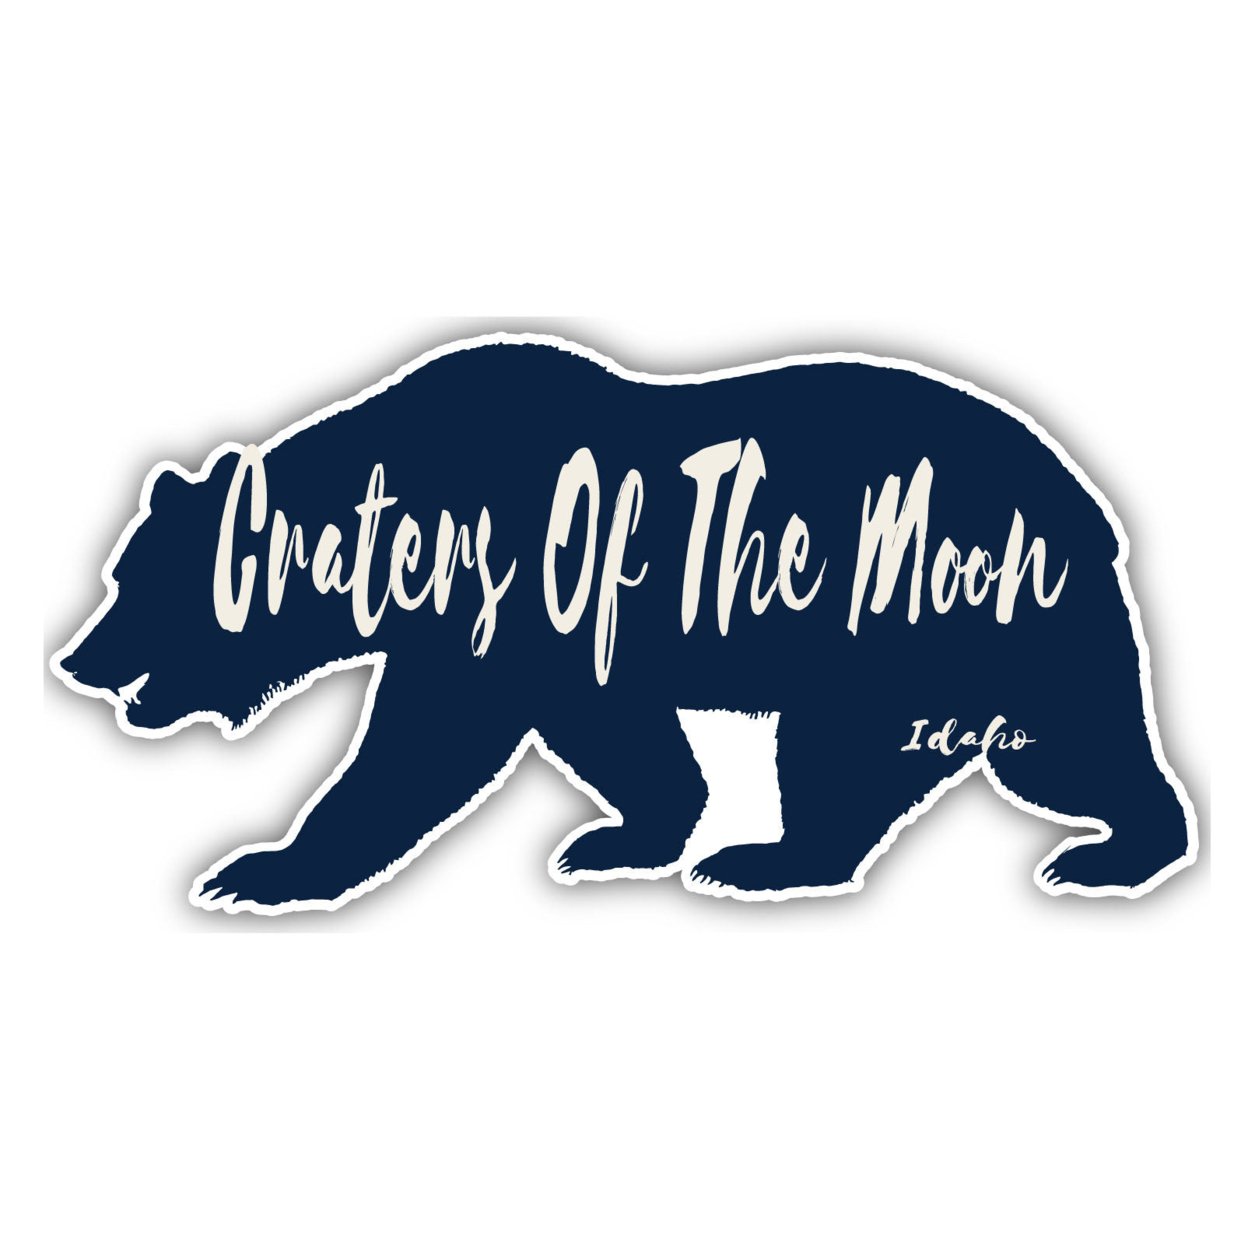 Craters Of The Moon Idaho Souvenir Decorative Stickers (Choose Theme And Size) - 4-Pack, 12-Inch, Bear